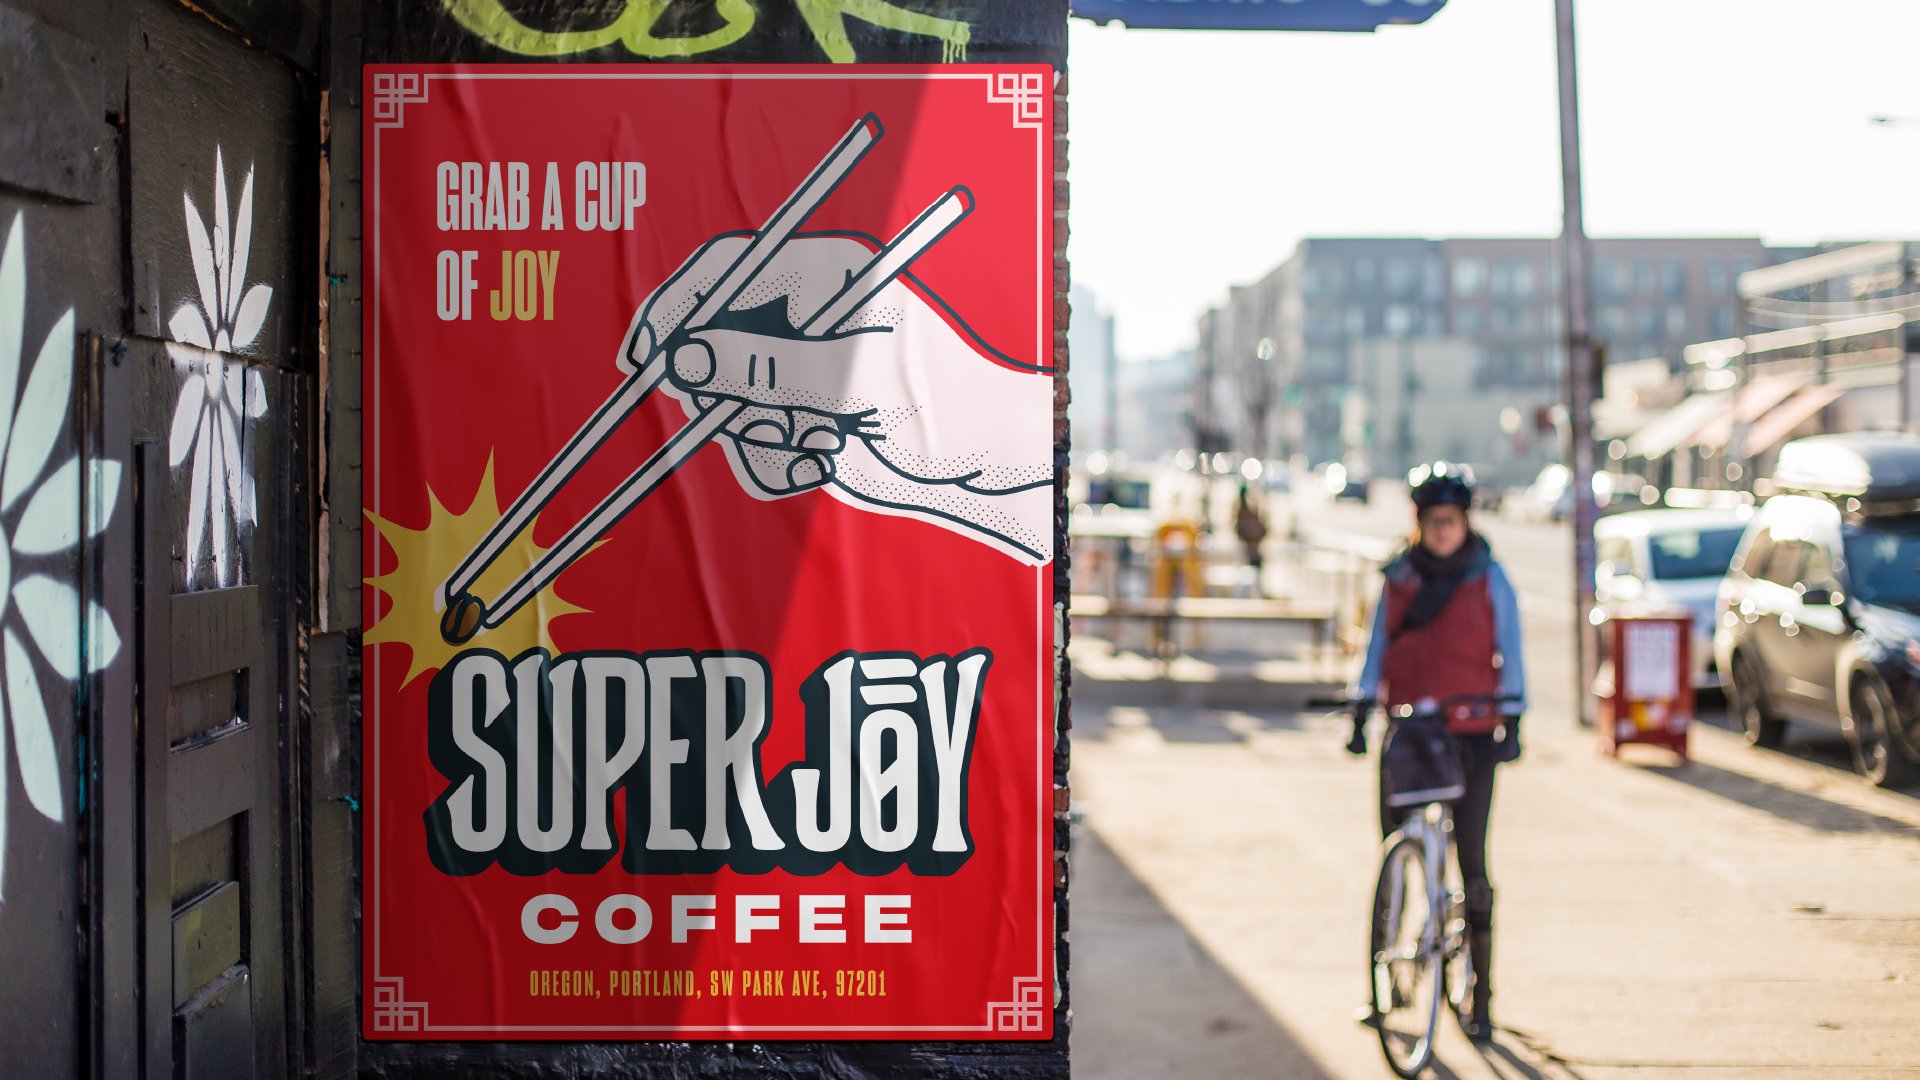 In the foreground, there’s a Super Joy Coffee poster. It’s got a similar design to the bag of coffee with a hand, chopsticks, and coffee bean. In the background is a bicyclist riding down a city street.